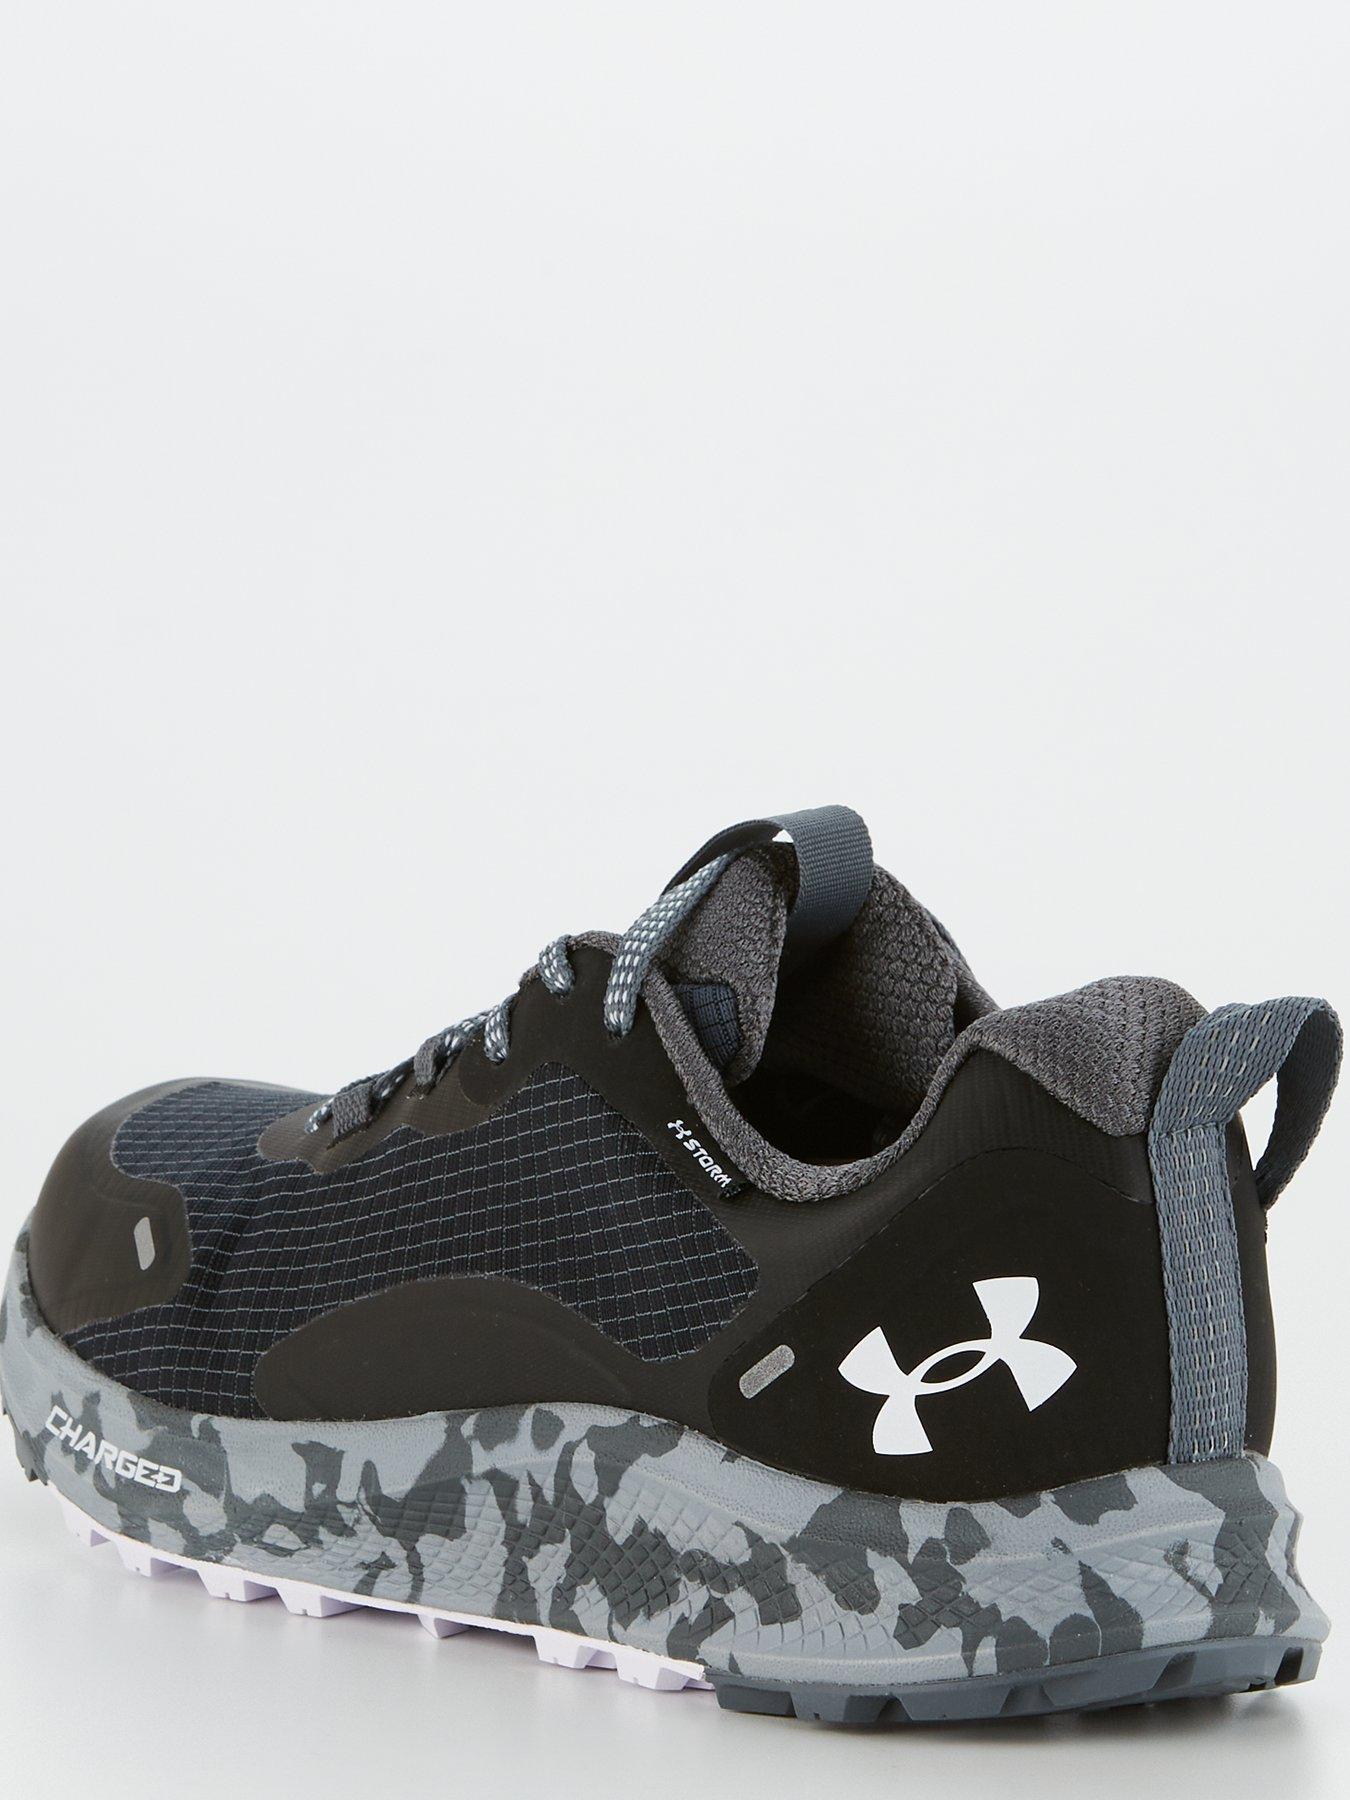 UNDER ARMOUR Running Charged Bandit Trail SP - Black/Grey very.co.uk